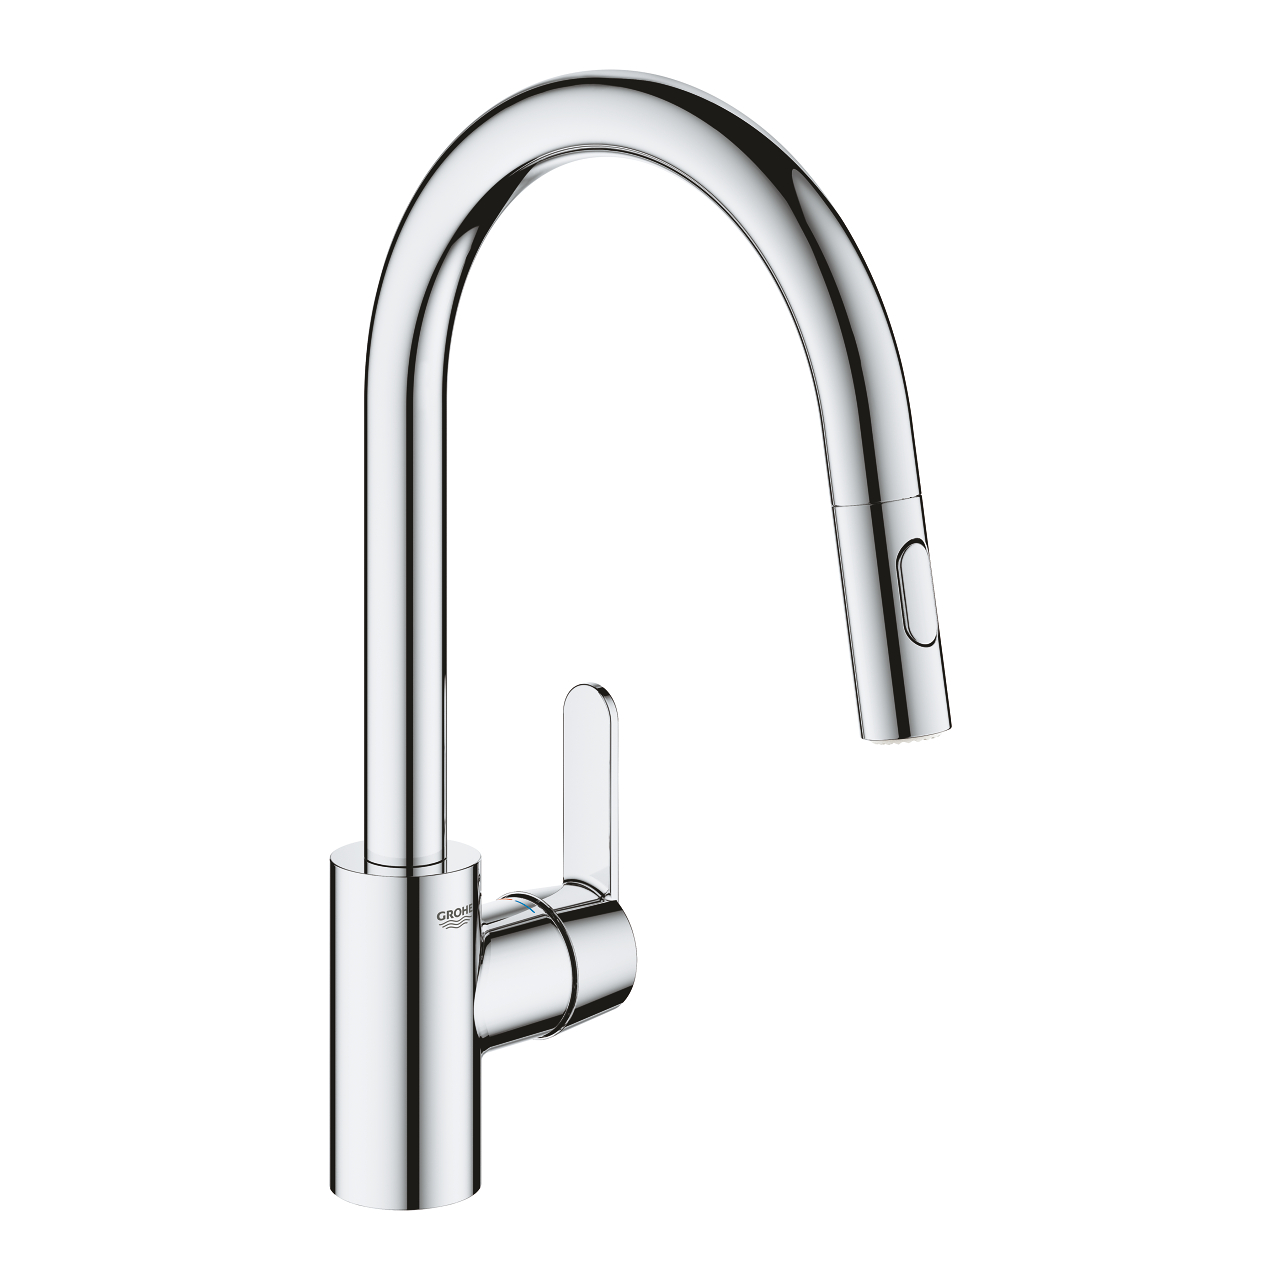 Baterie bucatarie Grohe Get cu dus extractibil dual spray pipa C crom Baterie